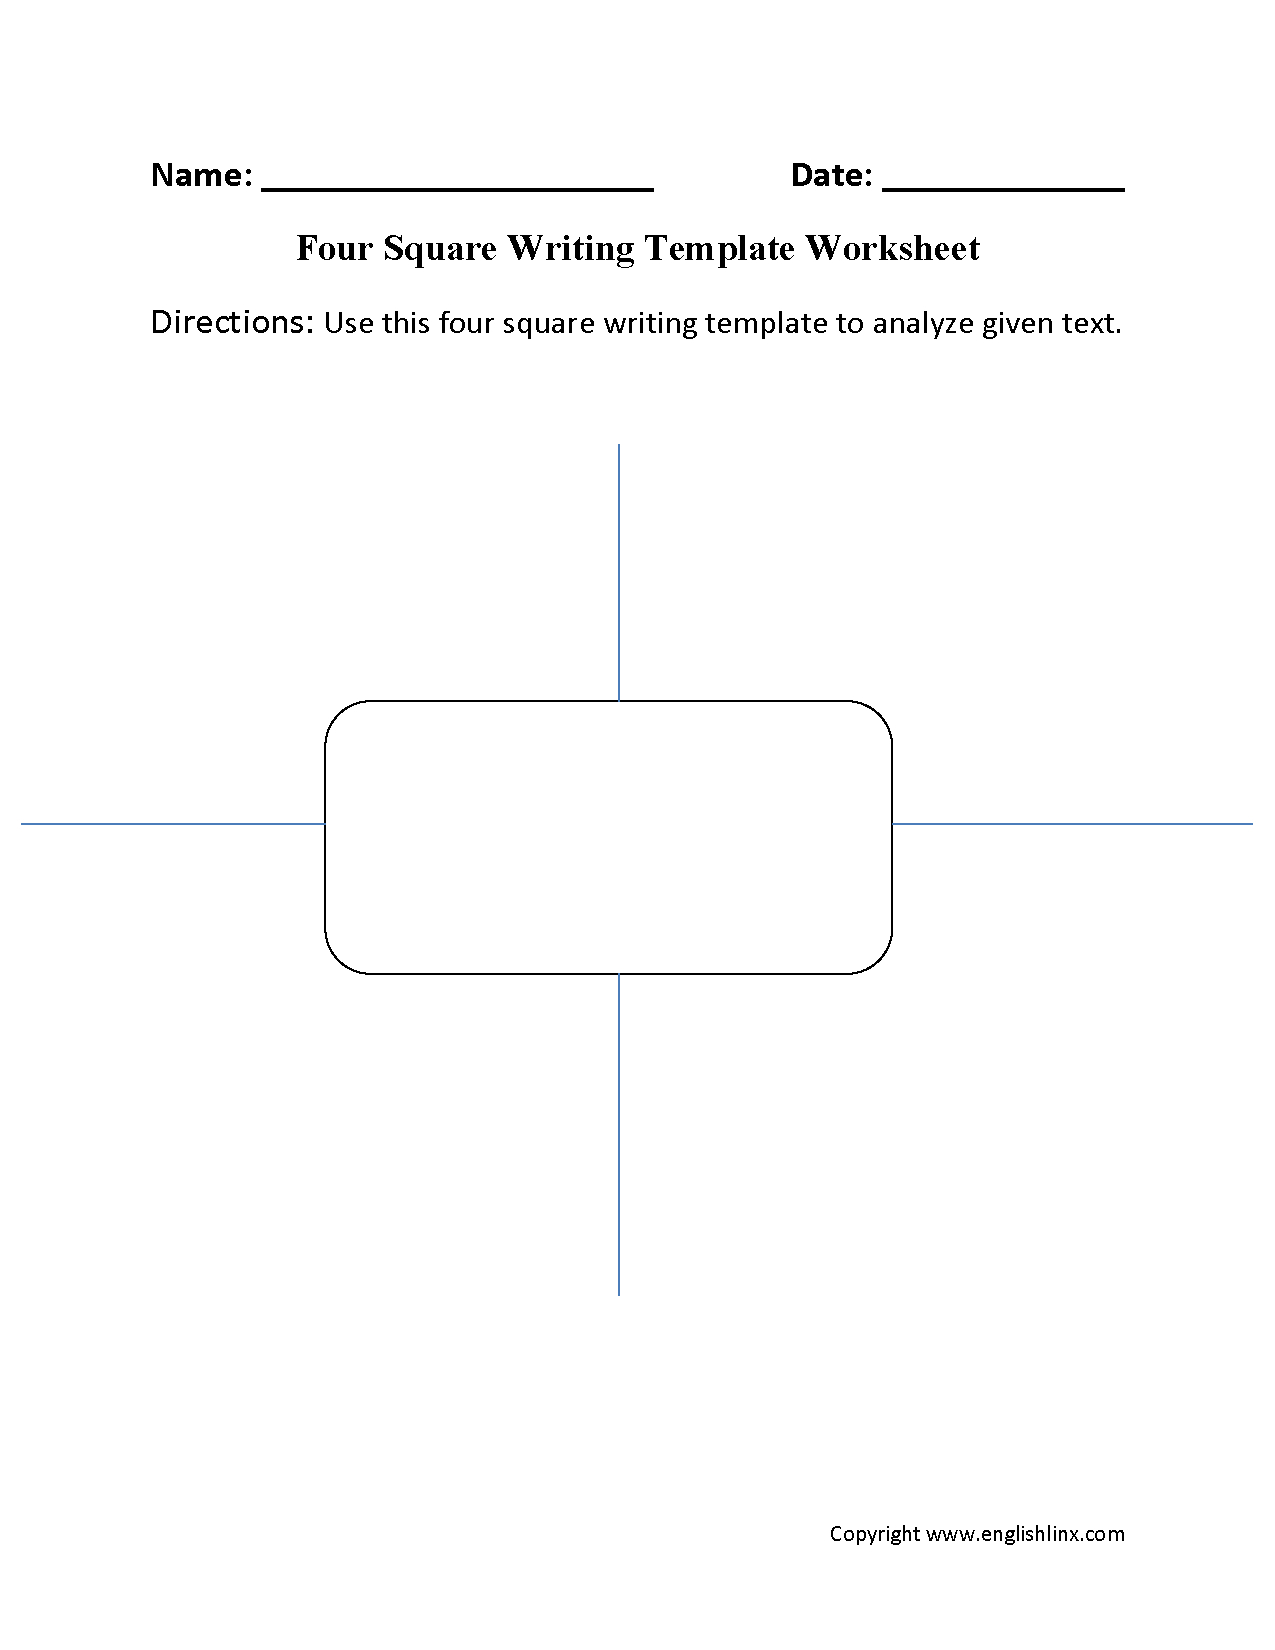 Writing Template Worksheets | Four Square Writing Template For Blank Four Square Writing Template